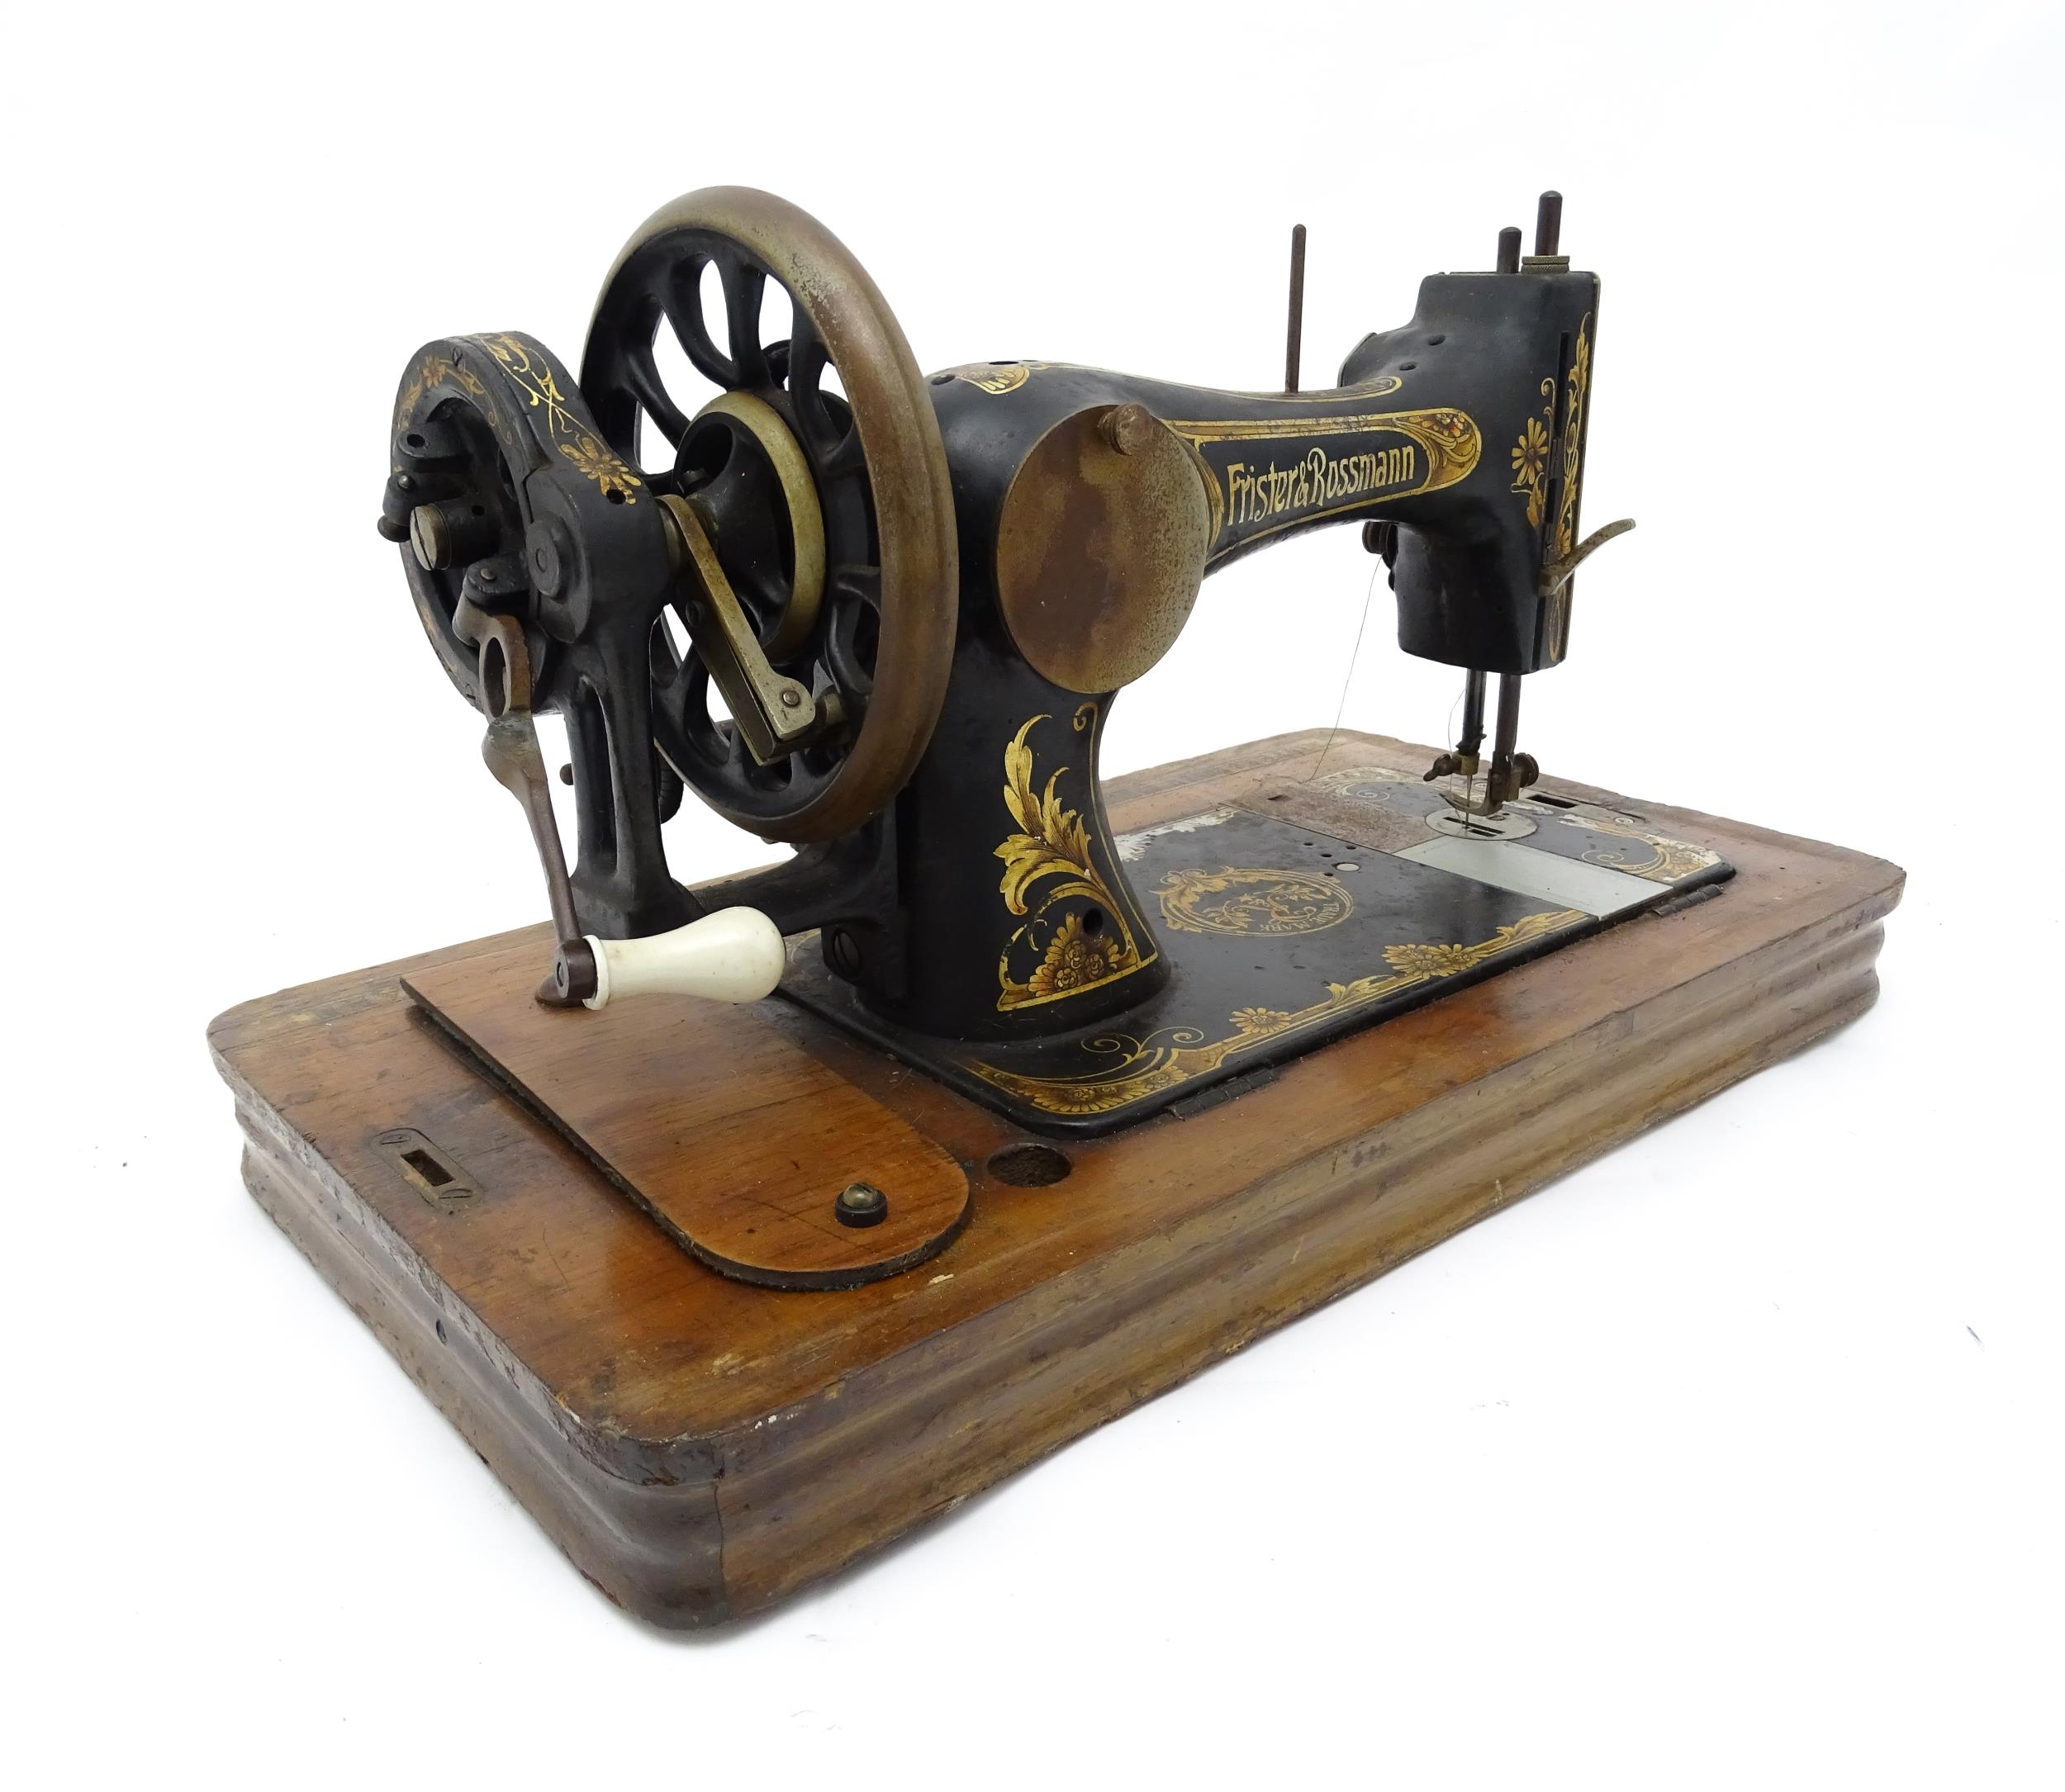 An early 20thC Frister & Rossmann hand crank sewing machine with floral and foliate decoration. - Image 5 of 15